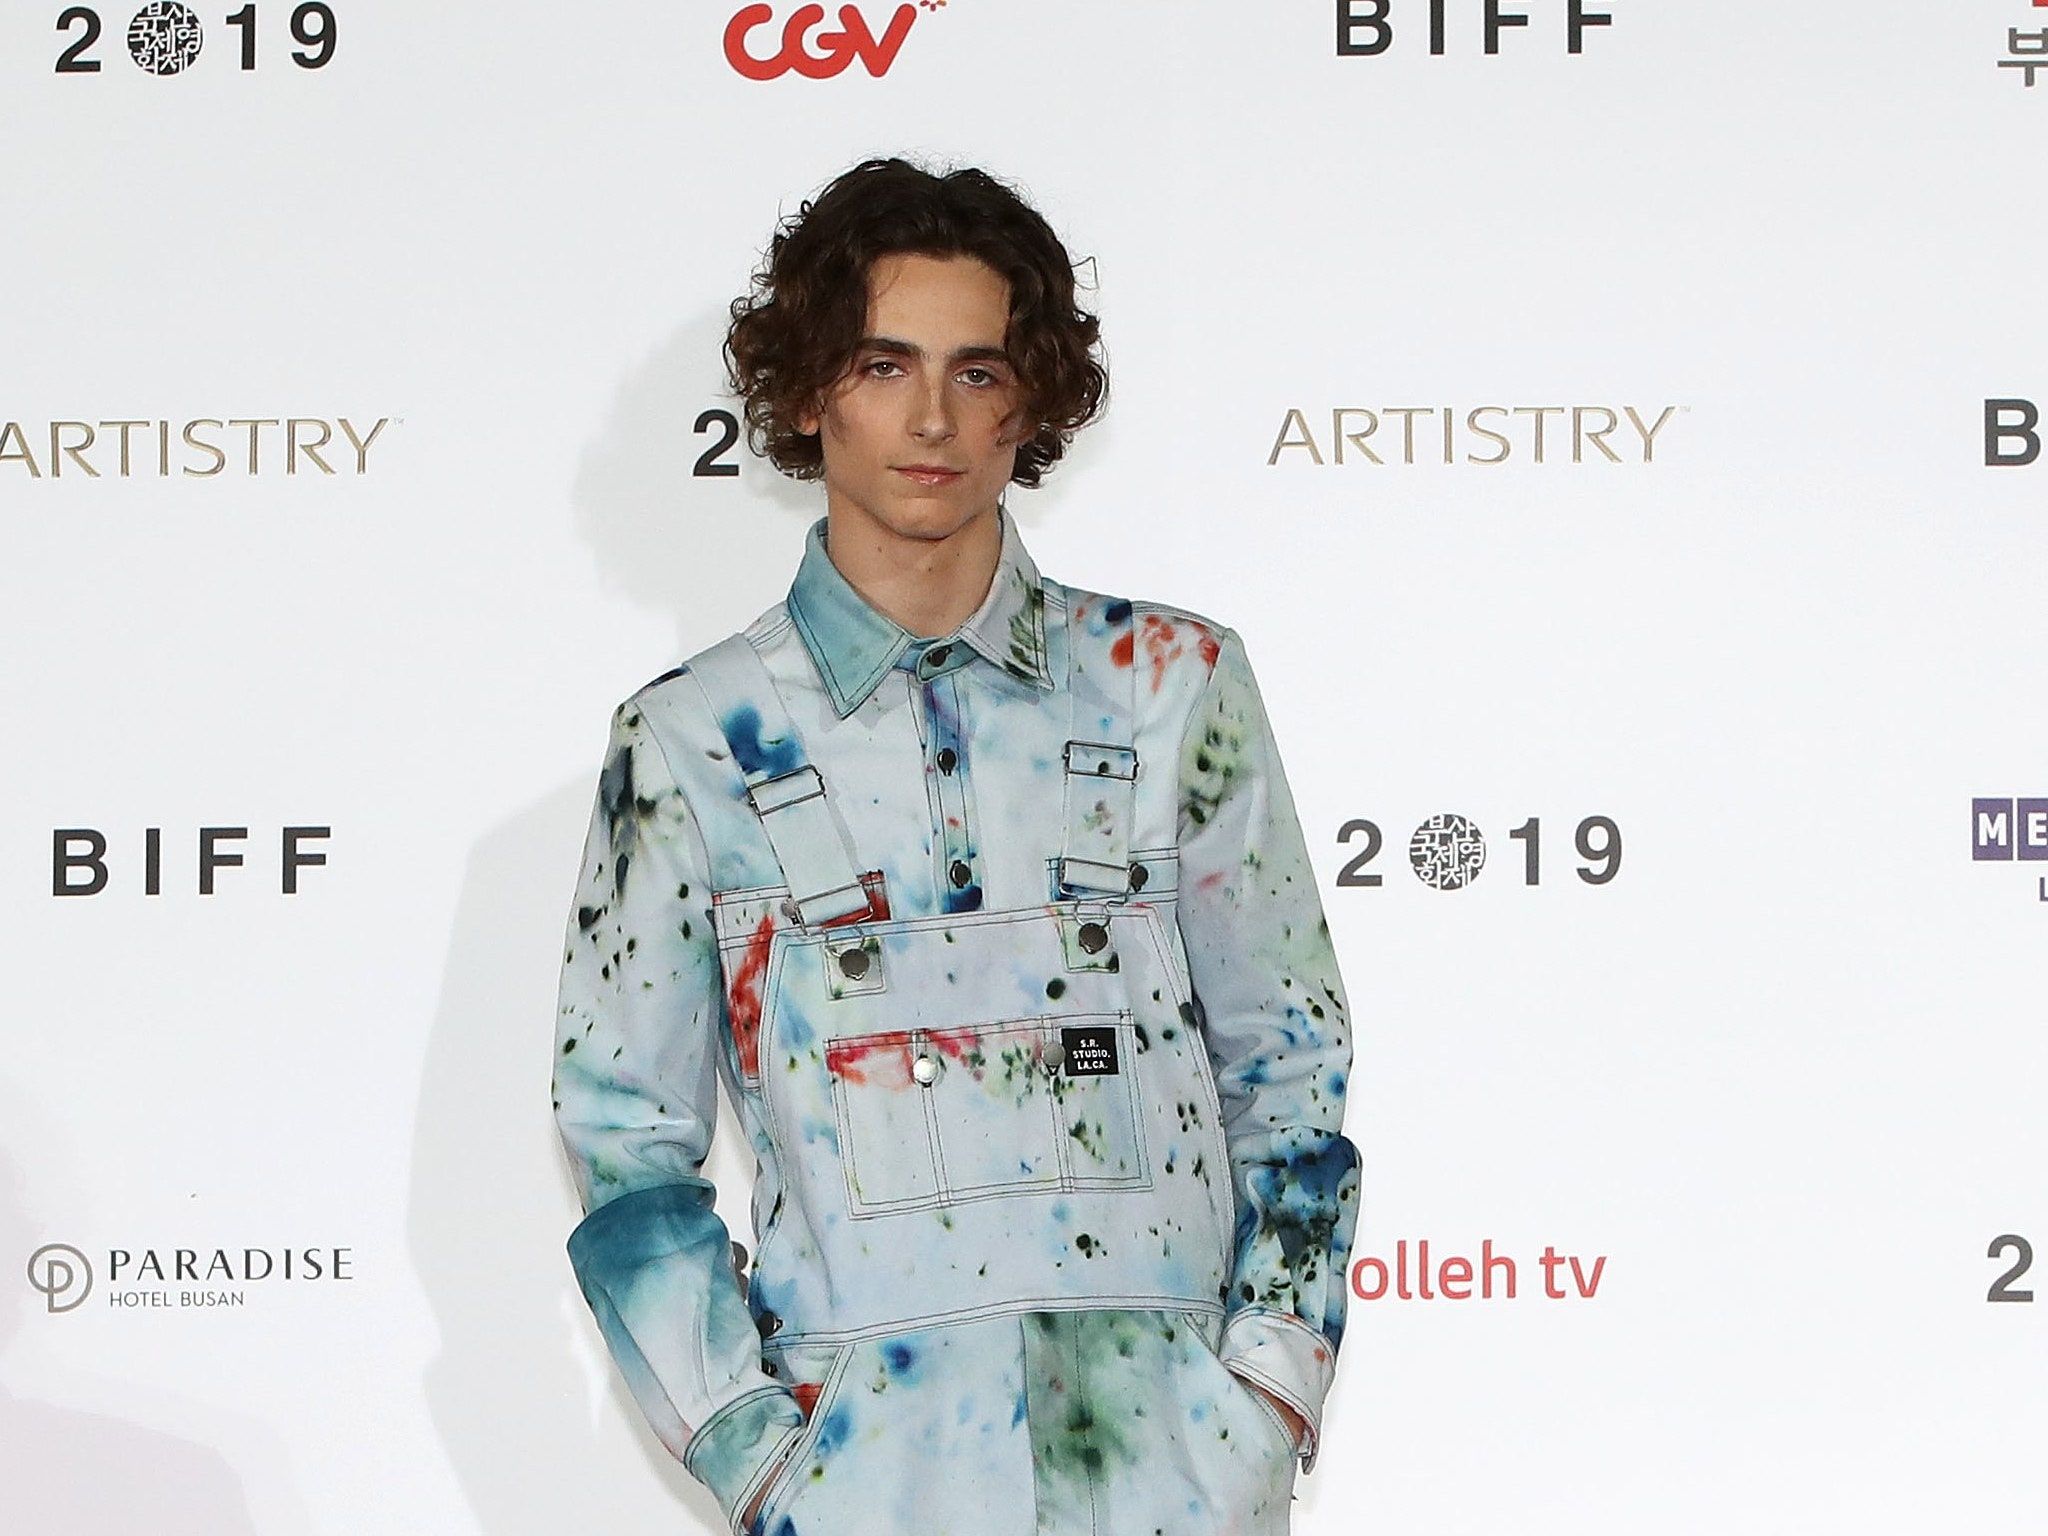 Timothee Chalamet at the 2019 BIFF opening ceremony - Timothee Chalamet